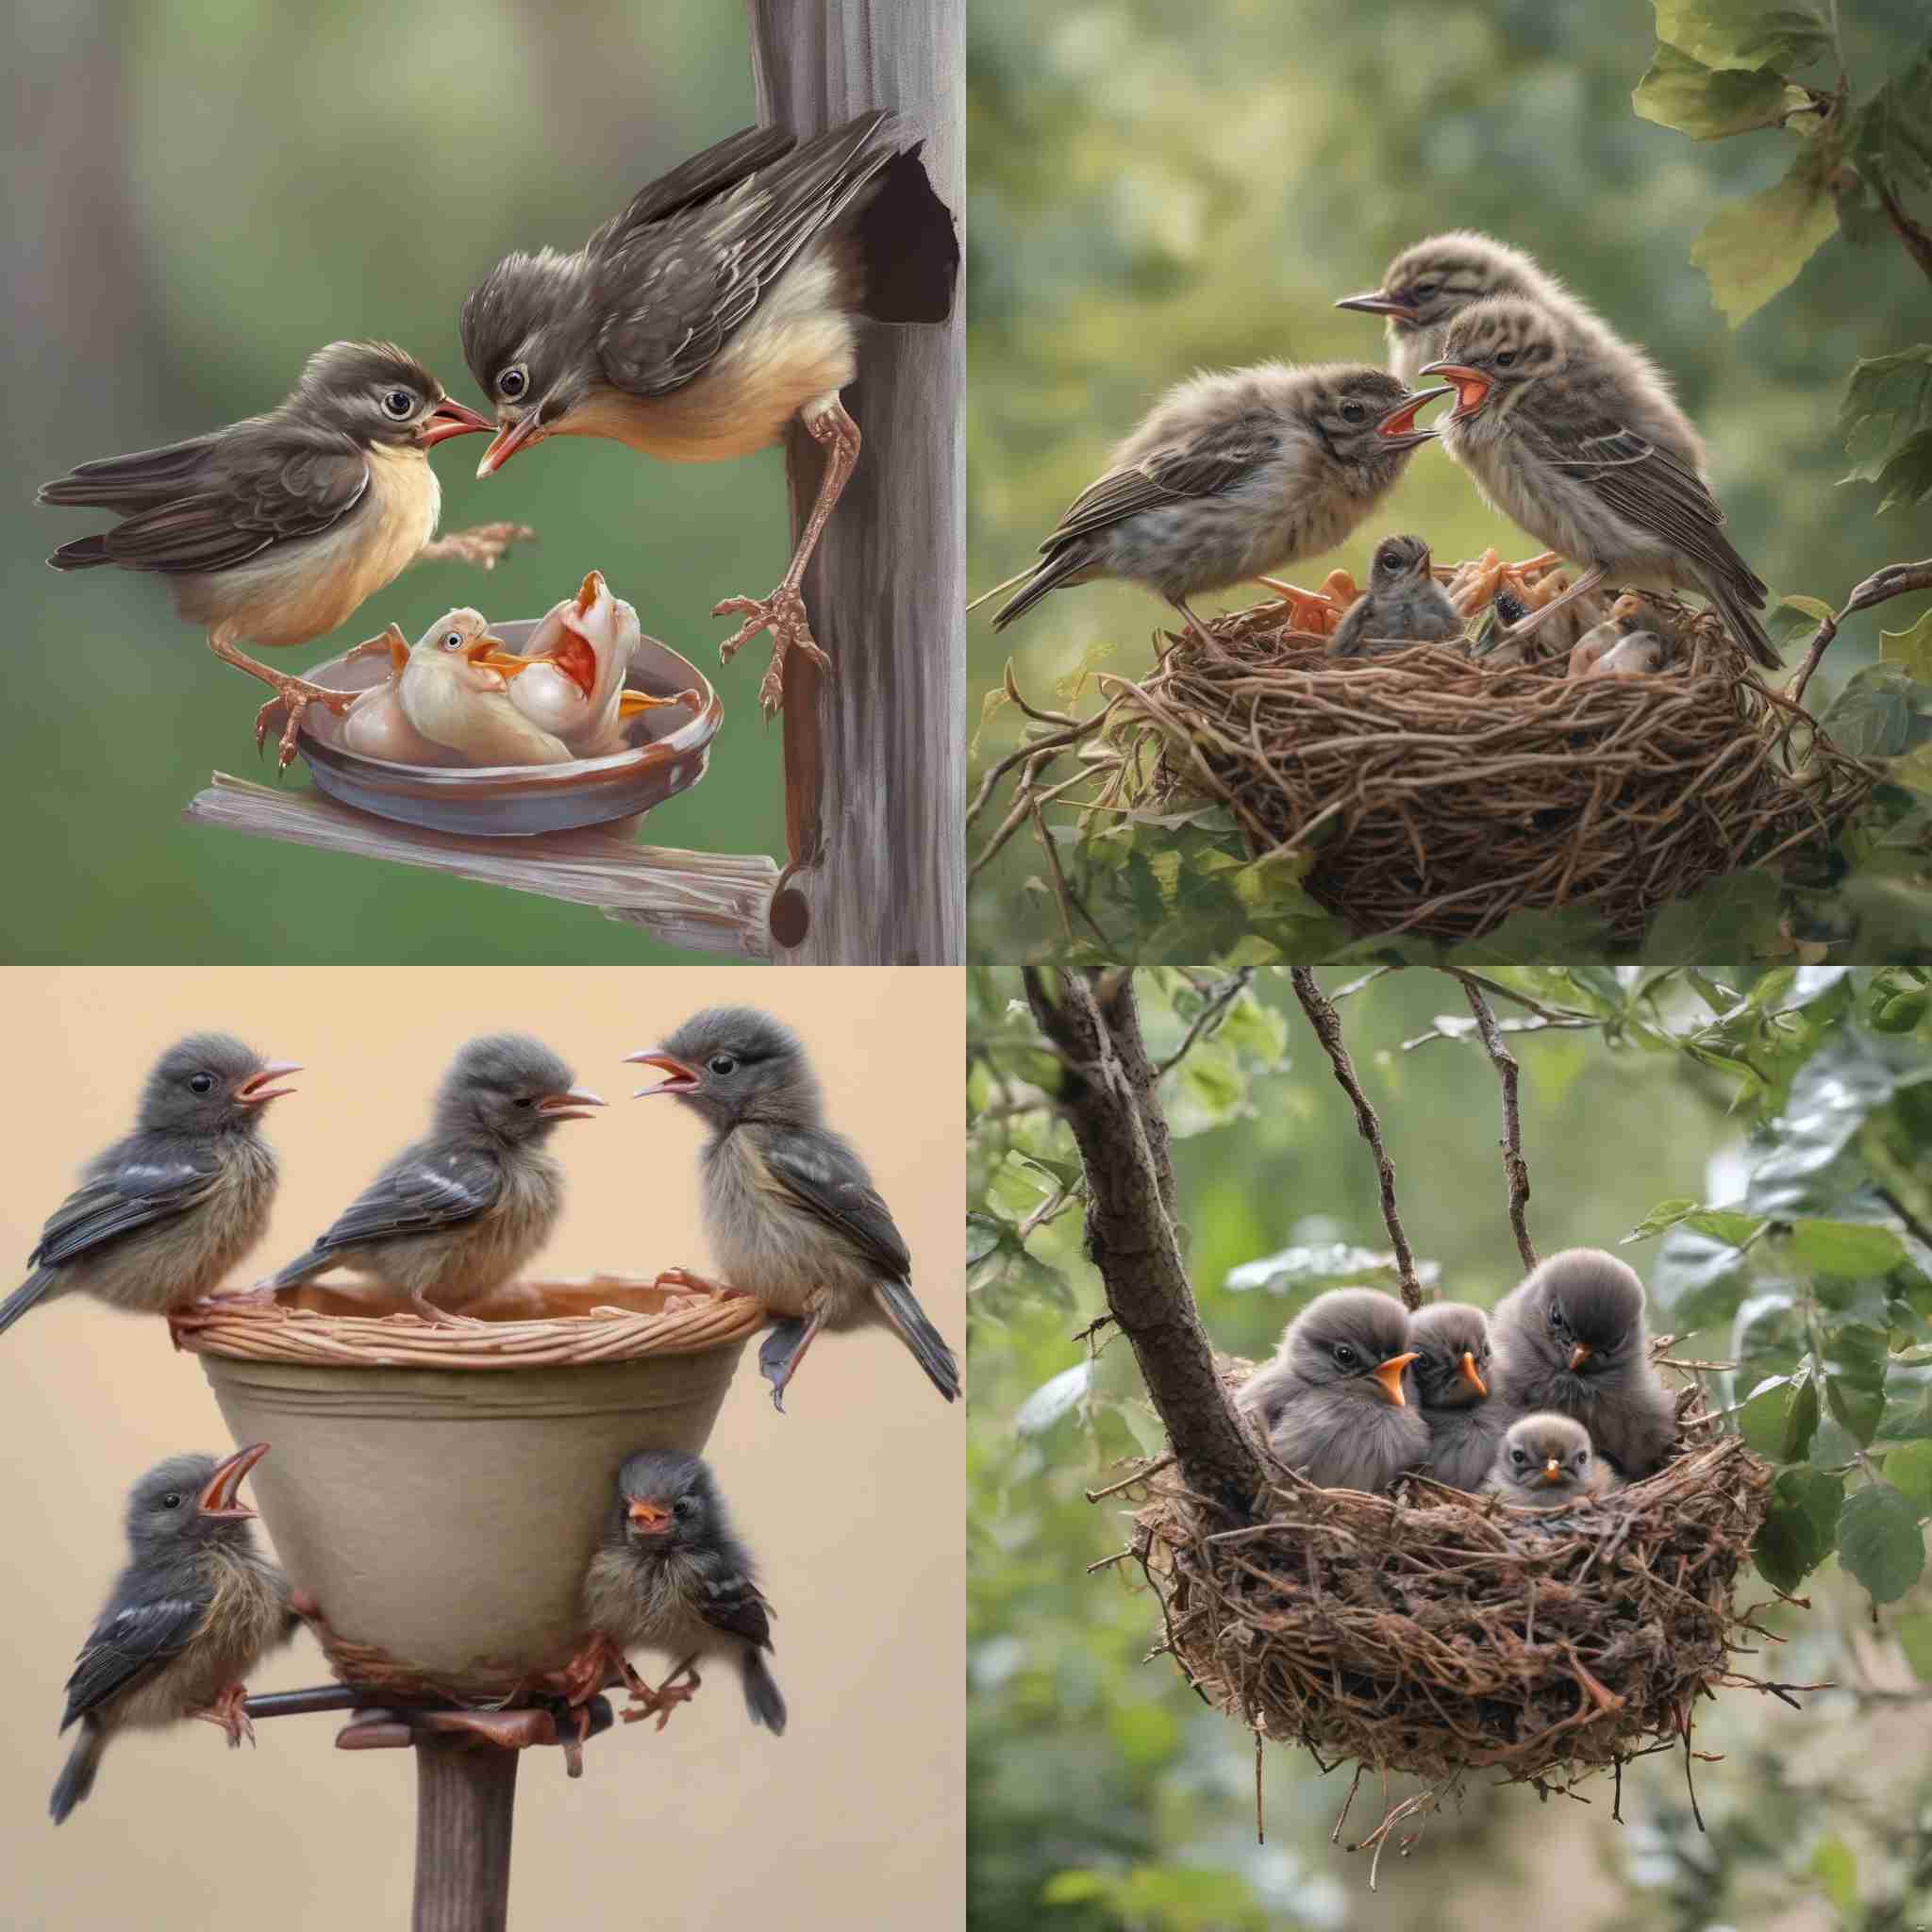 Hungry baby birds